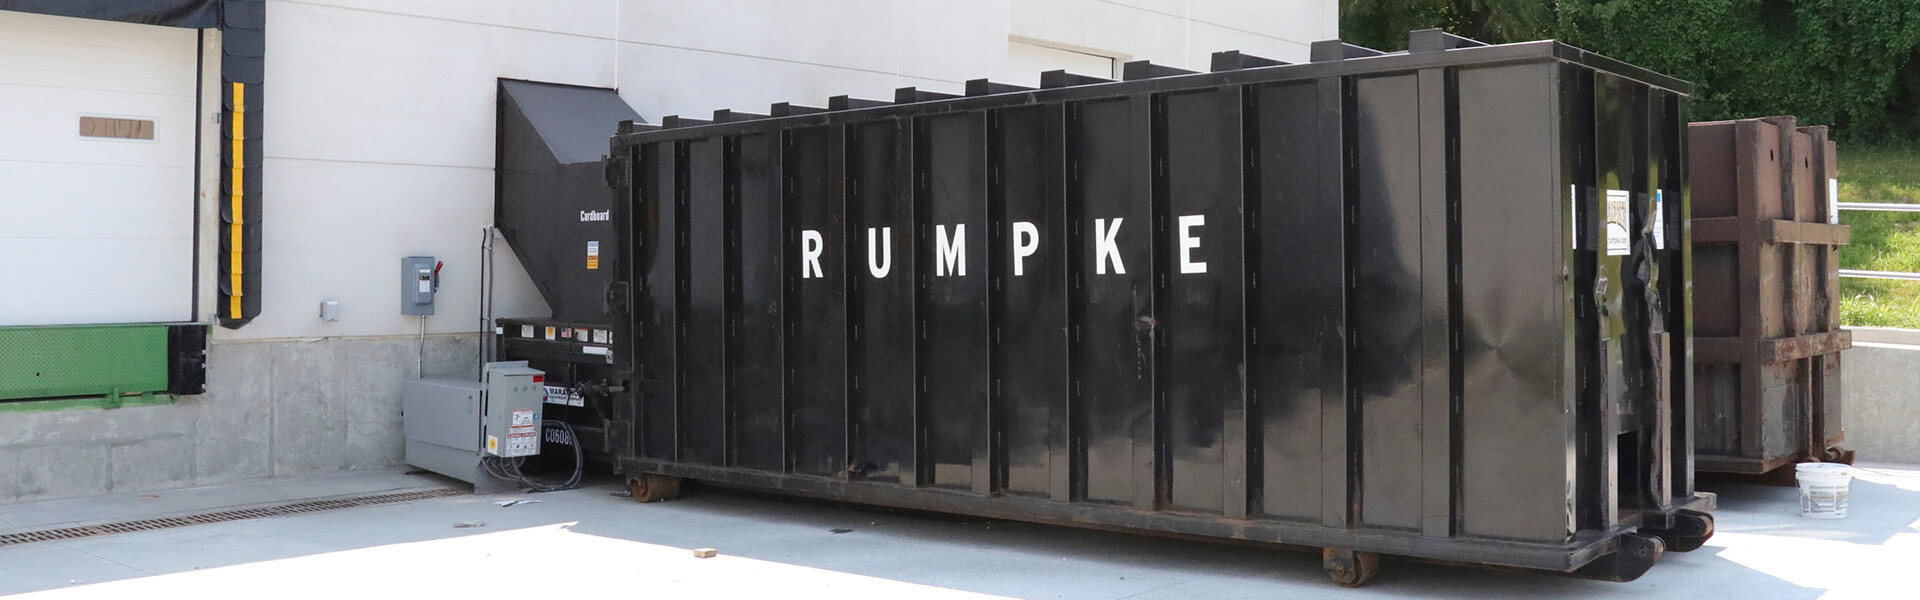 Rumpke Compactor For Warehouse Logistics Waste And Recycling Services